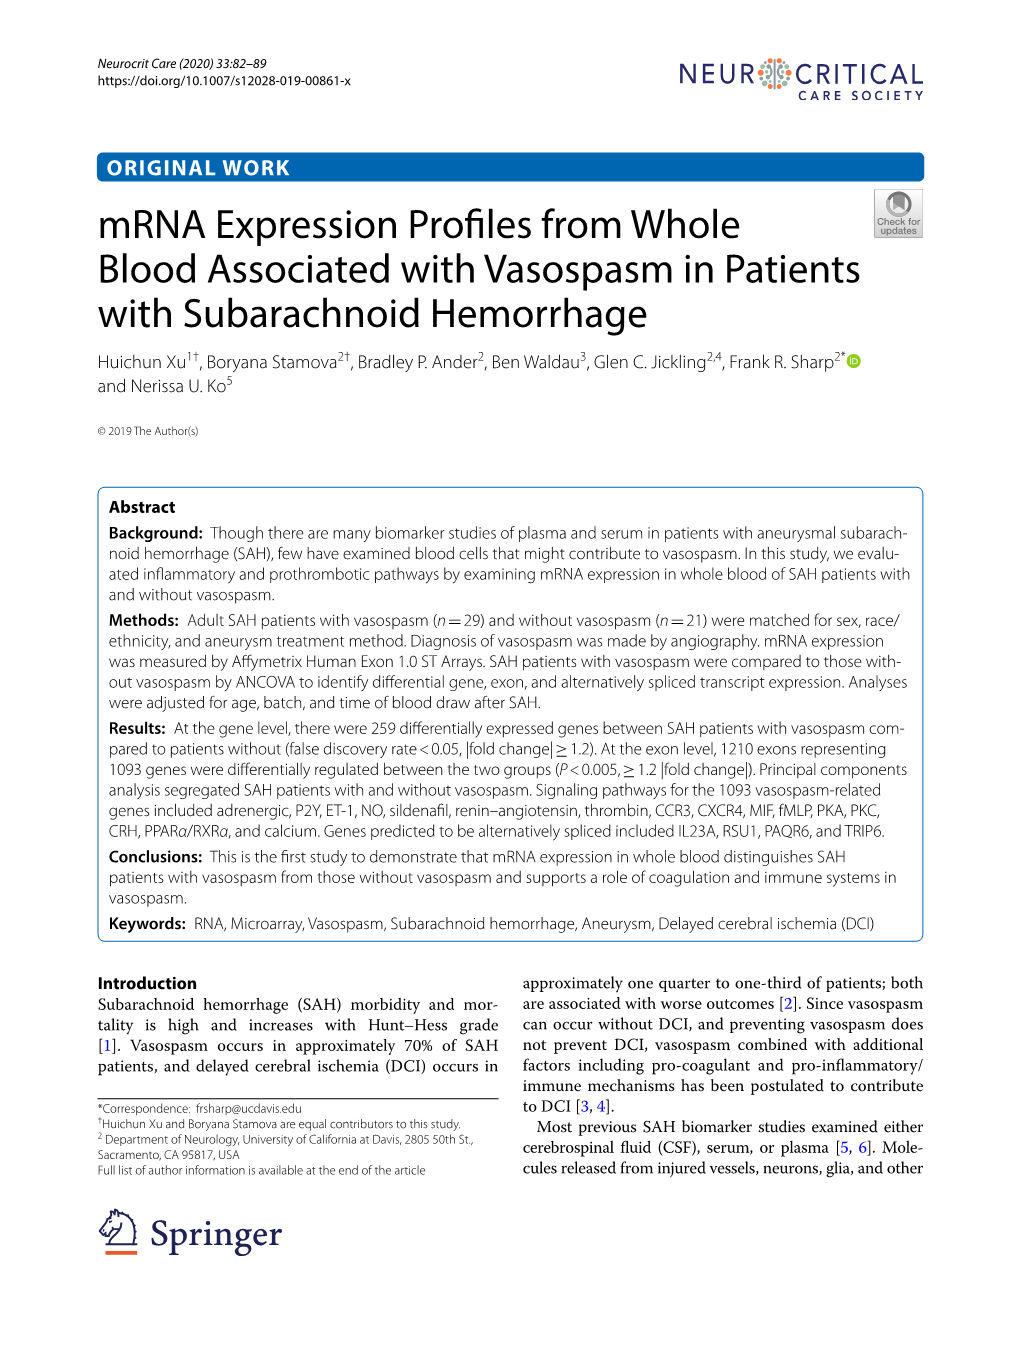 Mrna Expression Profiles from Whole Blood Associated with Vasospasm